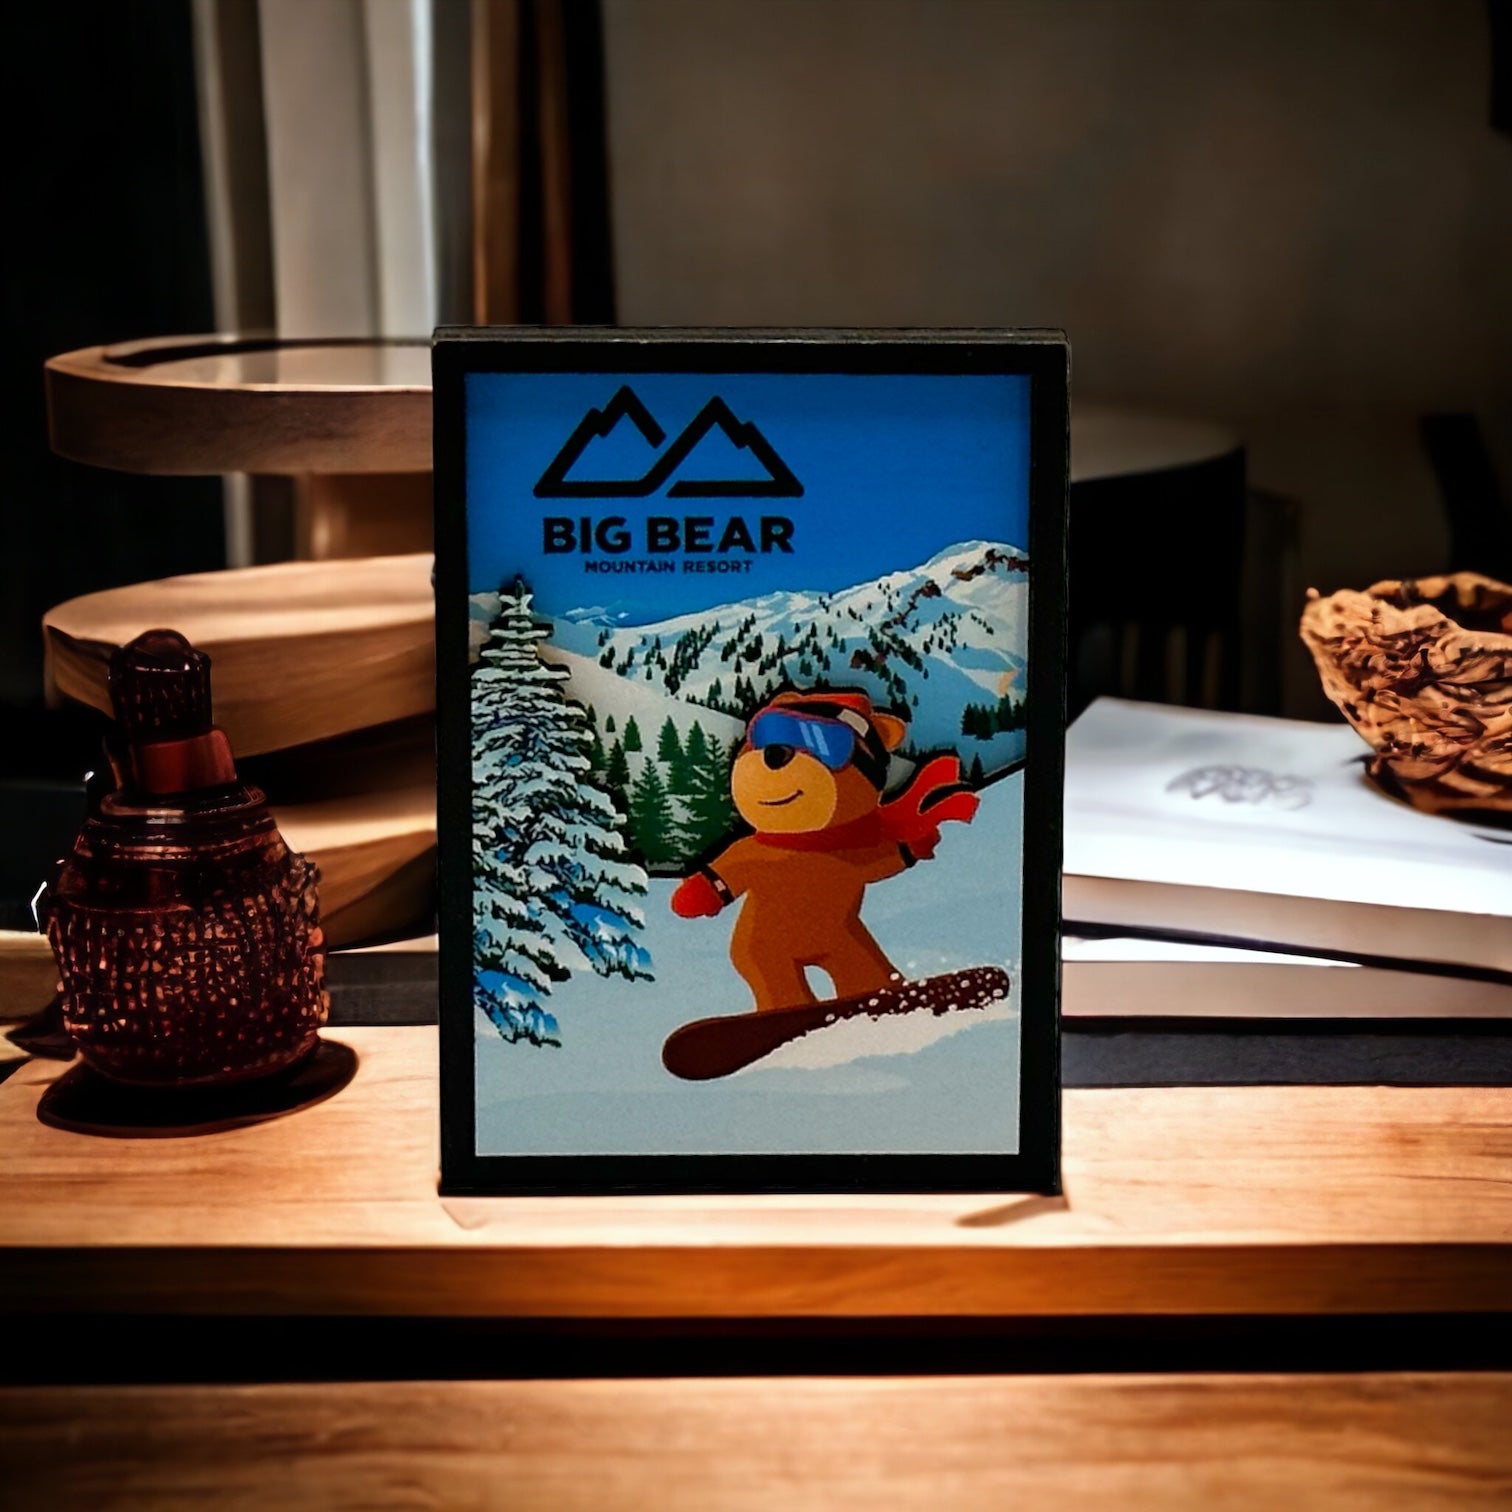 Big bear mountain resort wooden magnet with biggie the bear snowboarding with mountains snow and trees in background